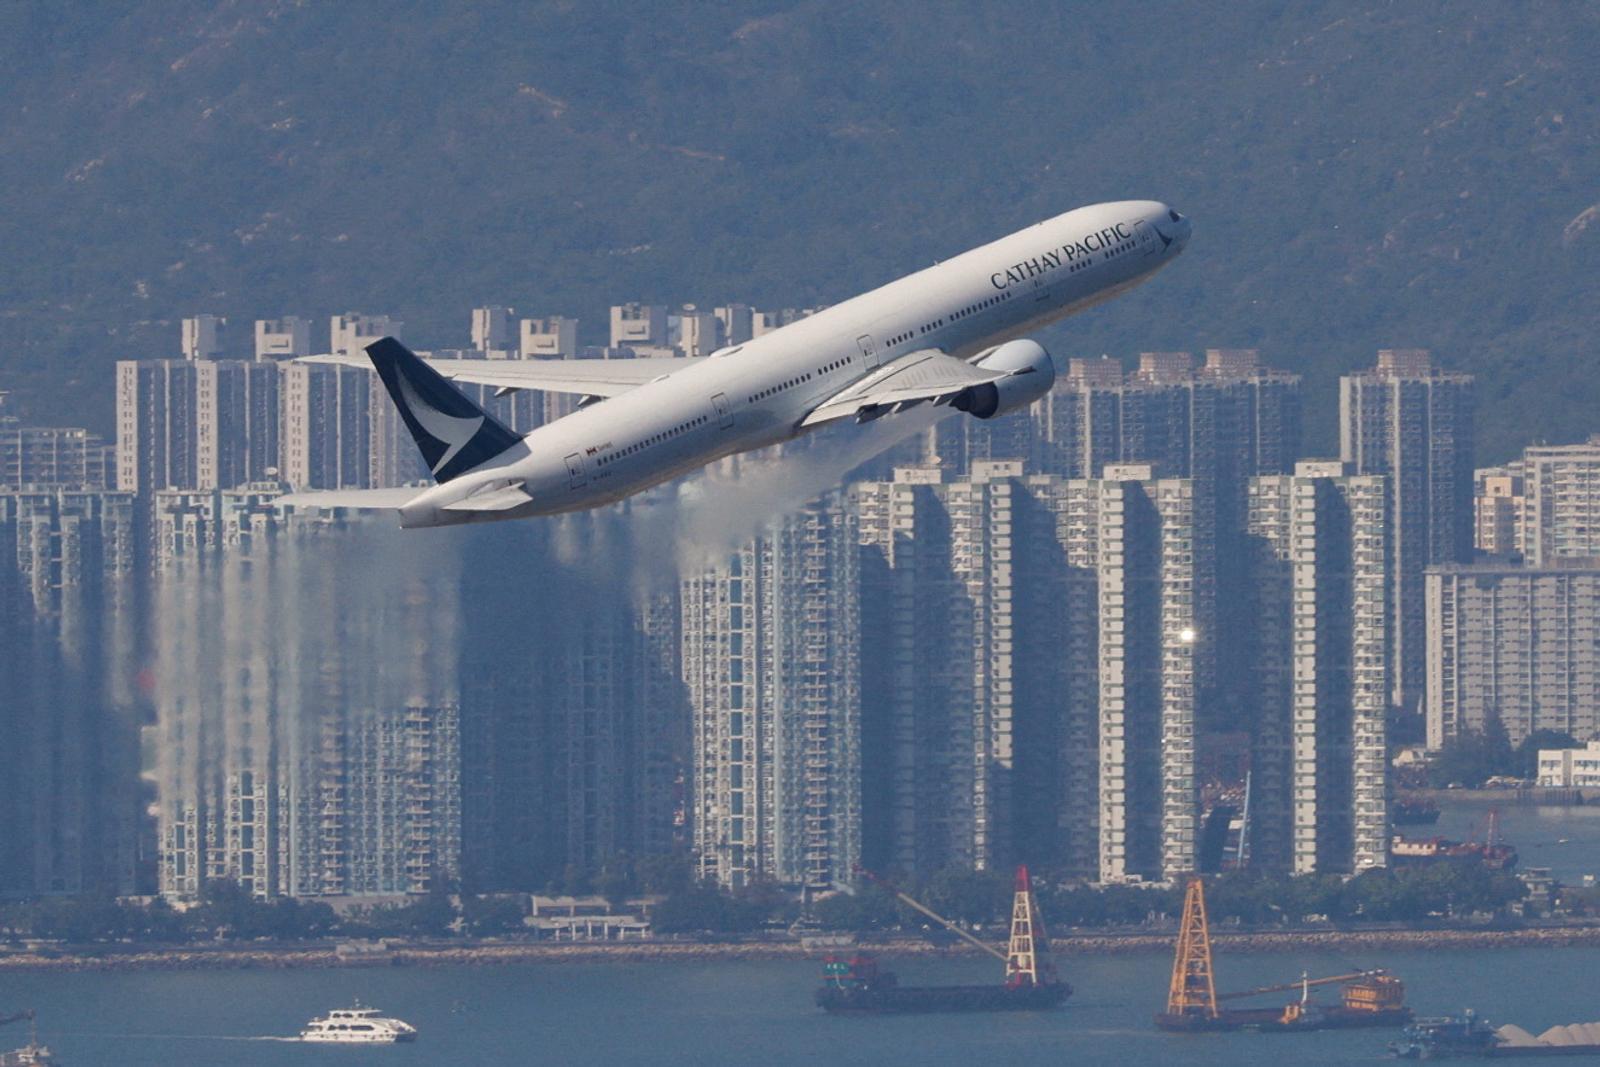 FILE PHOTO: A Cathay Pacific aircraft takes off at the airport, during the coronavirus disease (COVID-19) pandemic in Hong Kong, China, March 31, 2022. REUTERS/Tyrone Siu/File Photo Photo: TYRONE SIU/REUTERS